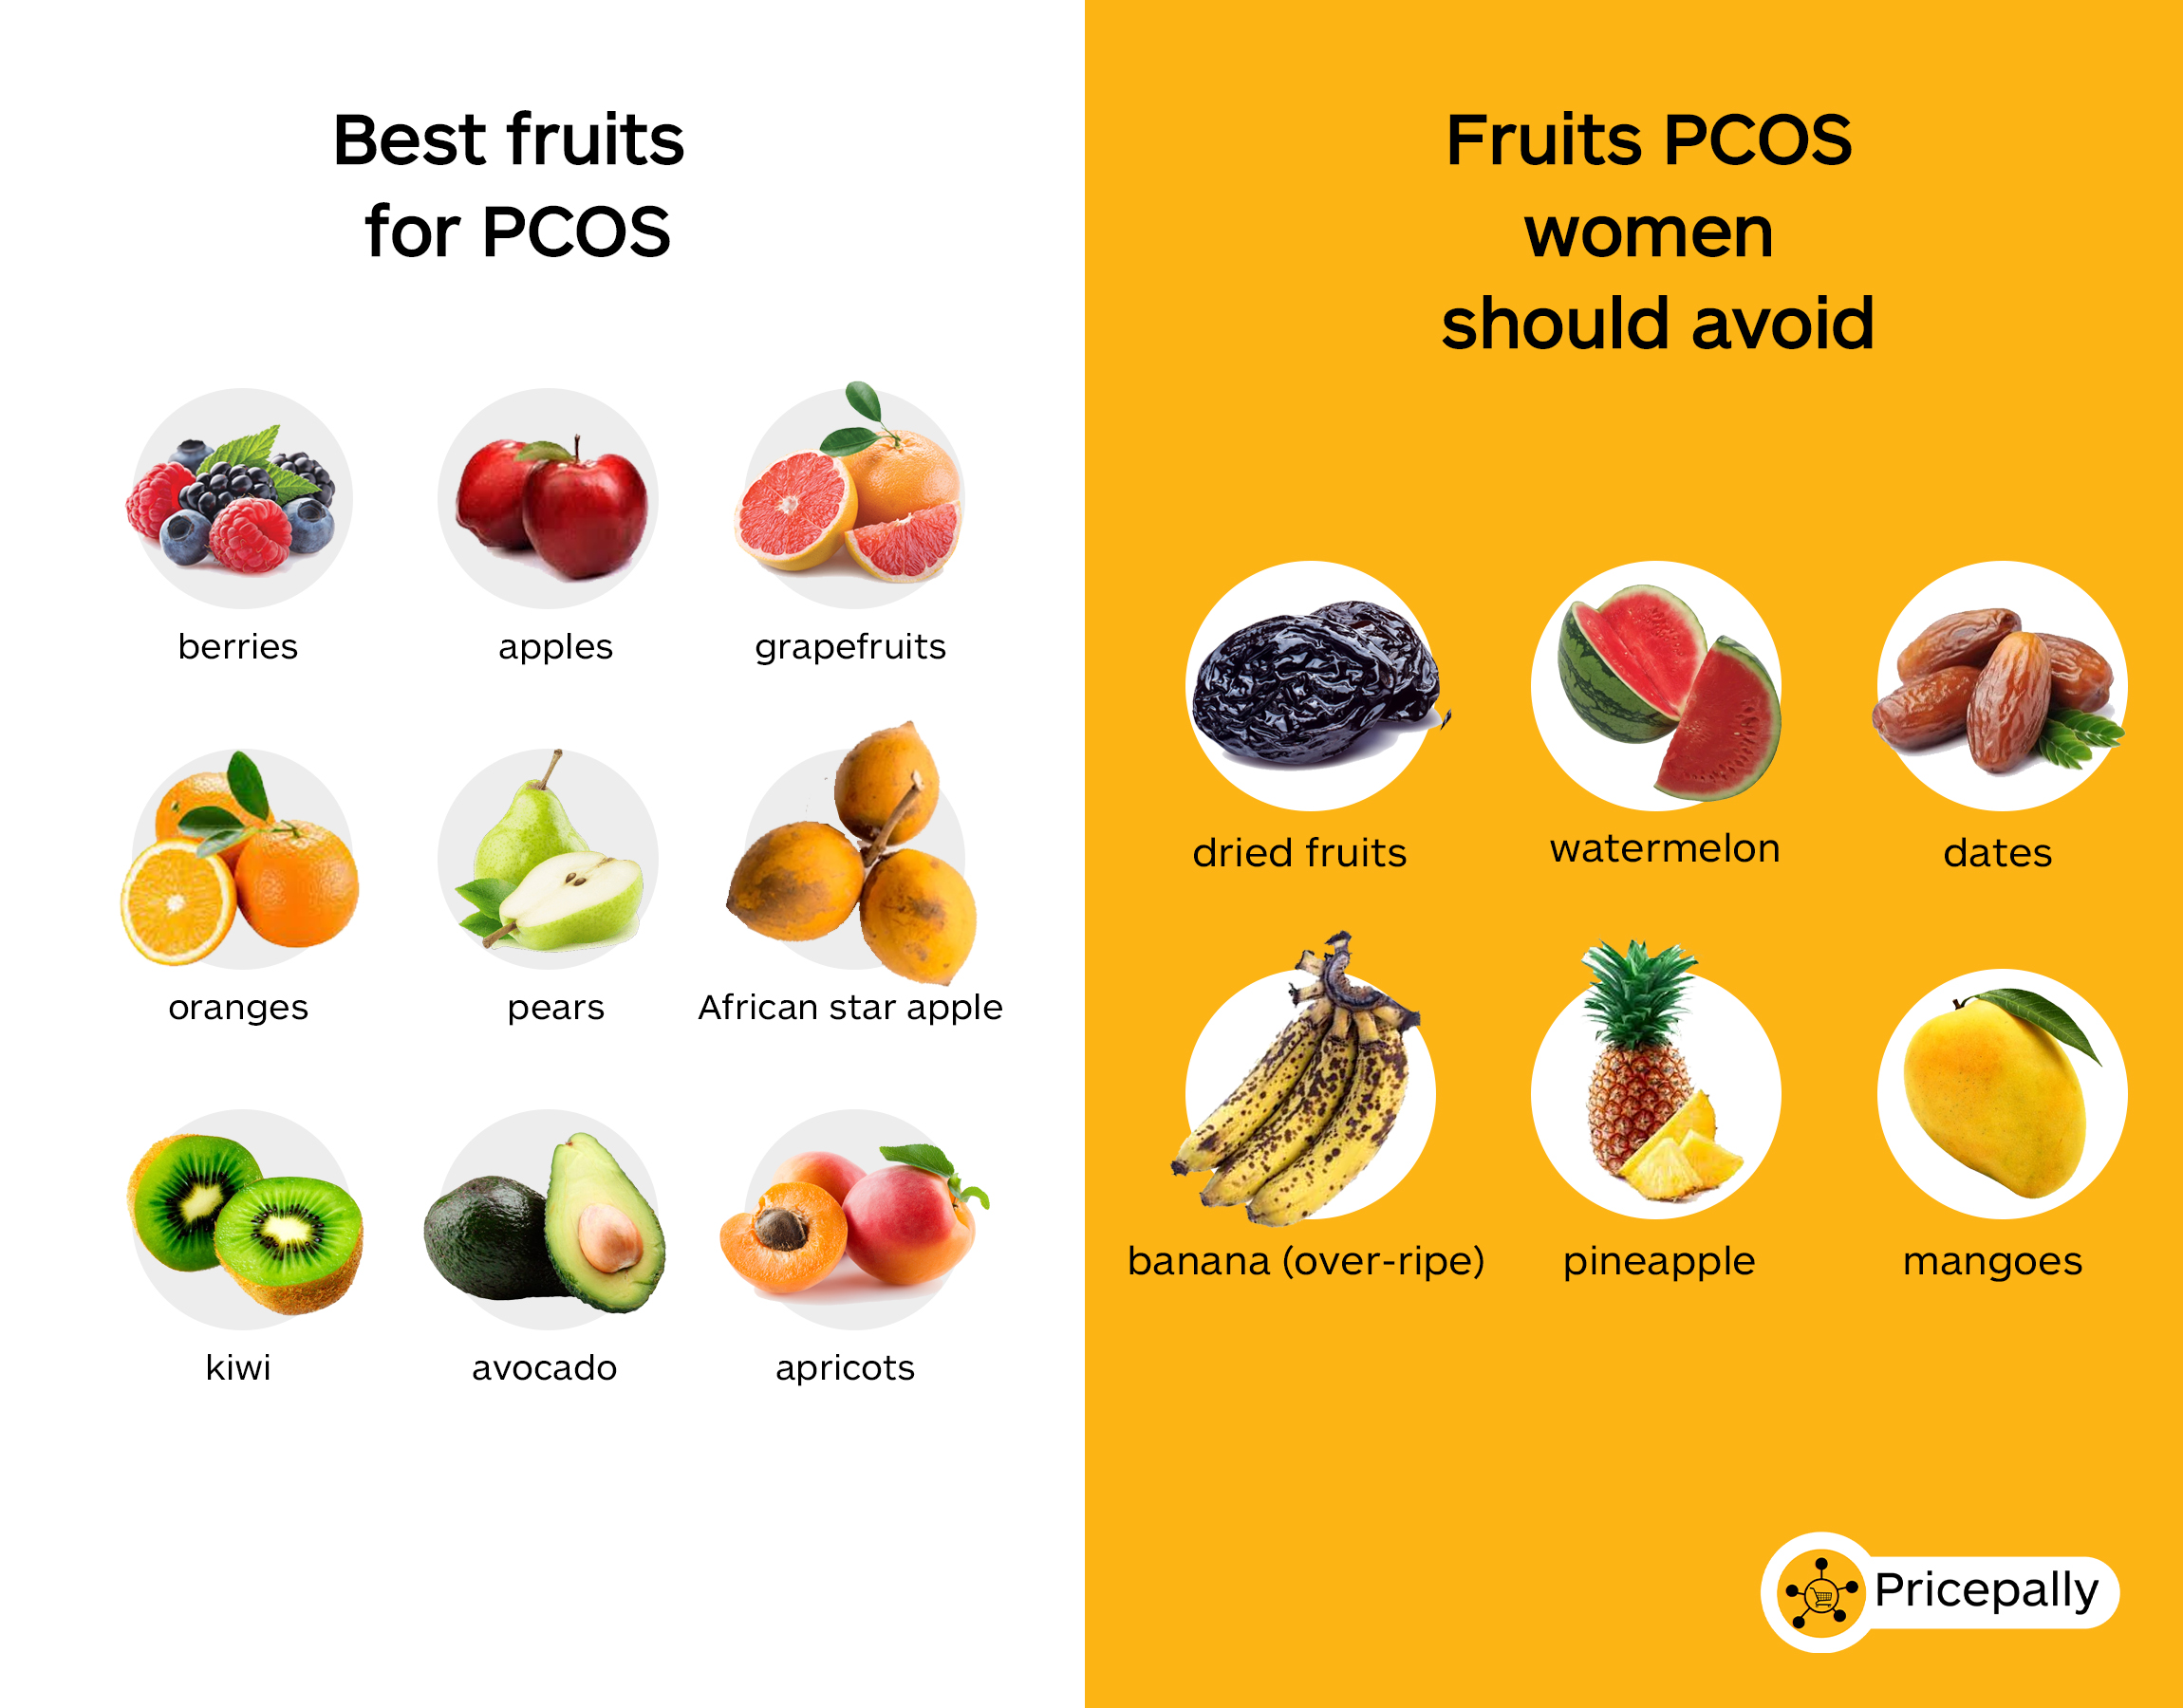 The best and worst fruits for PCOS for women in Nigeria